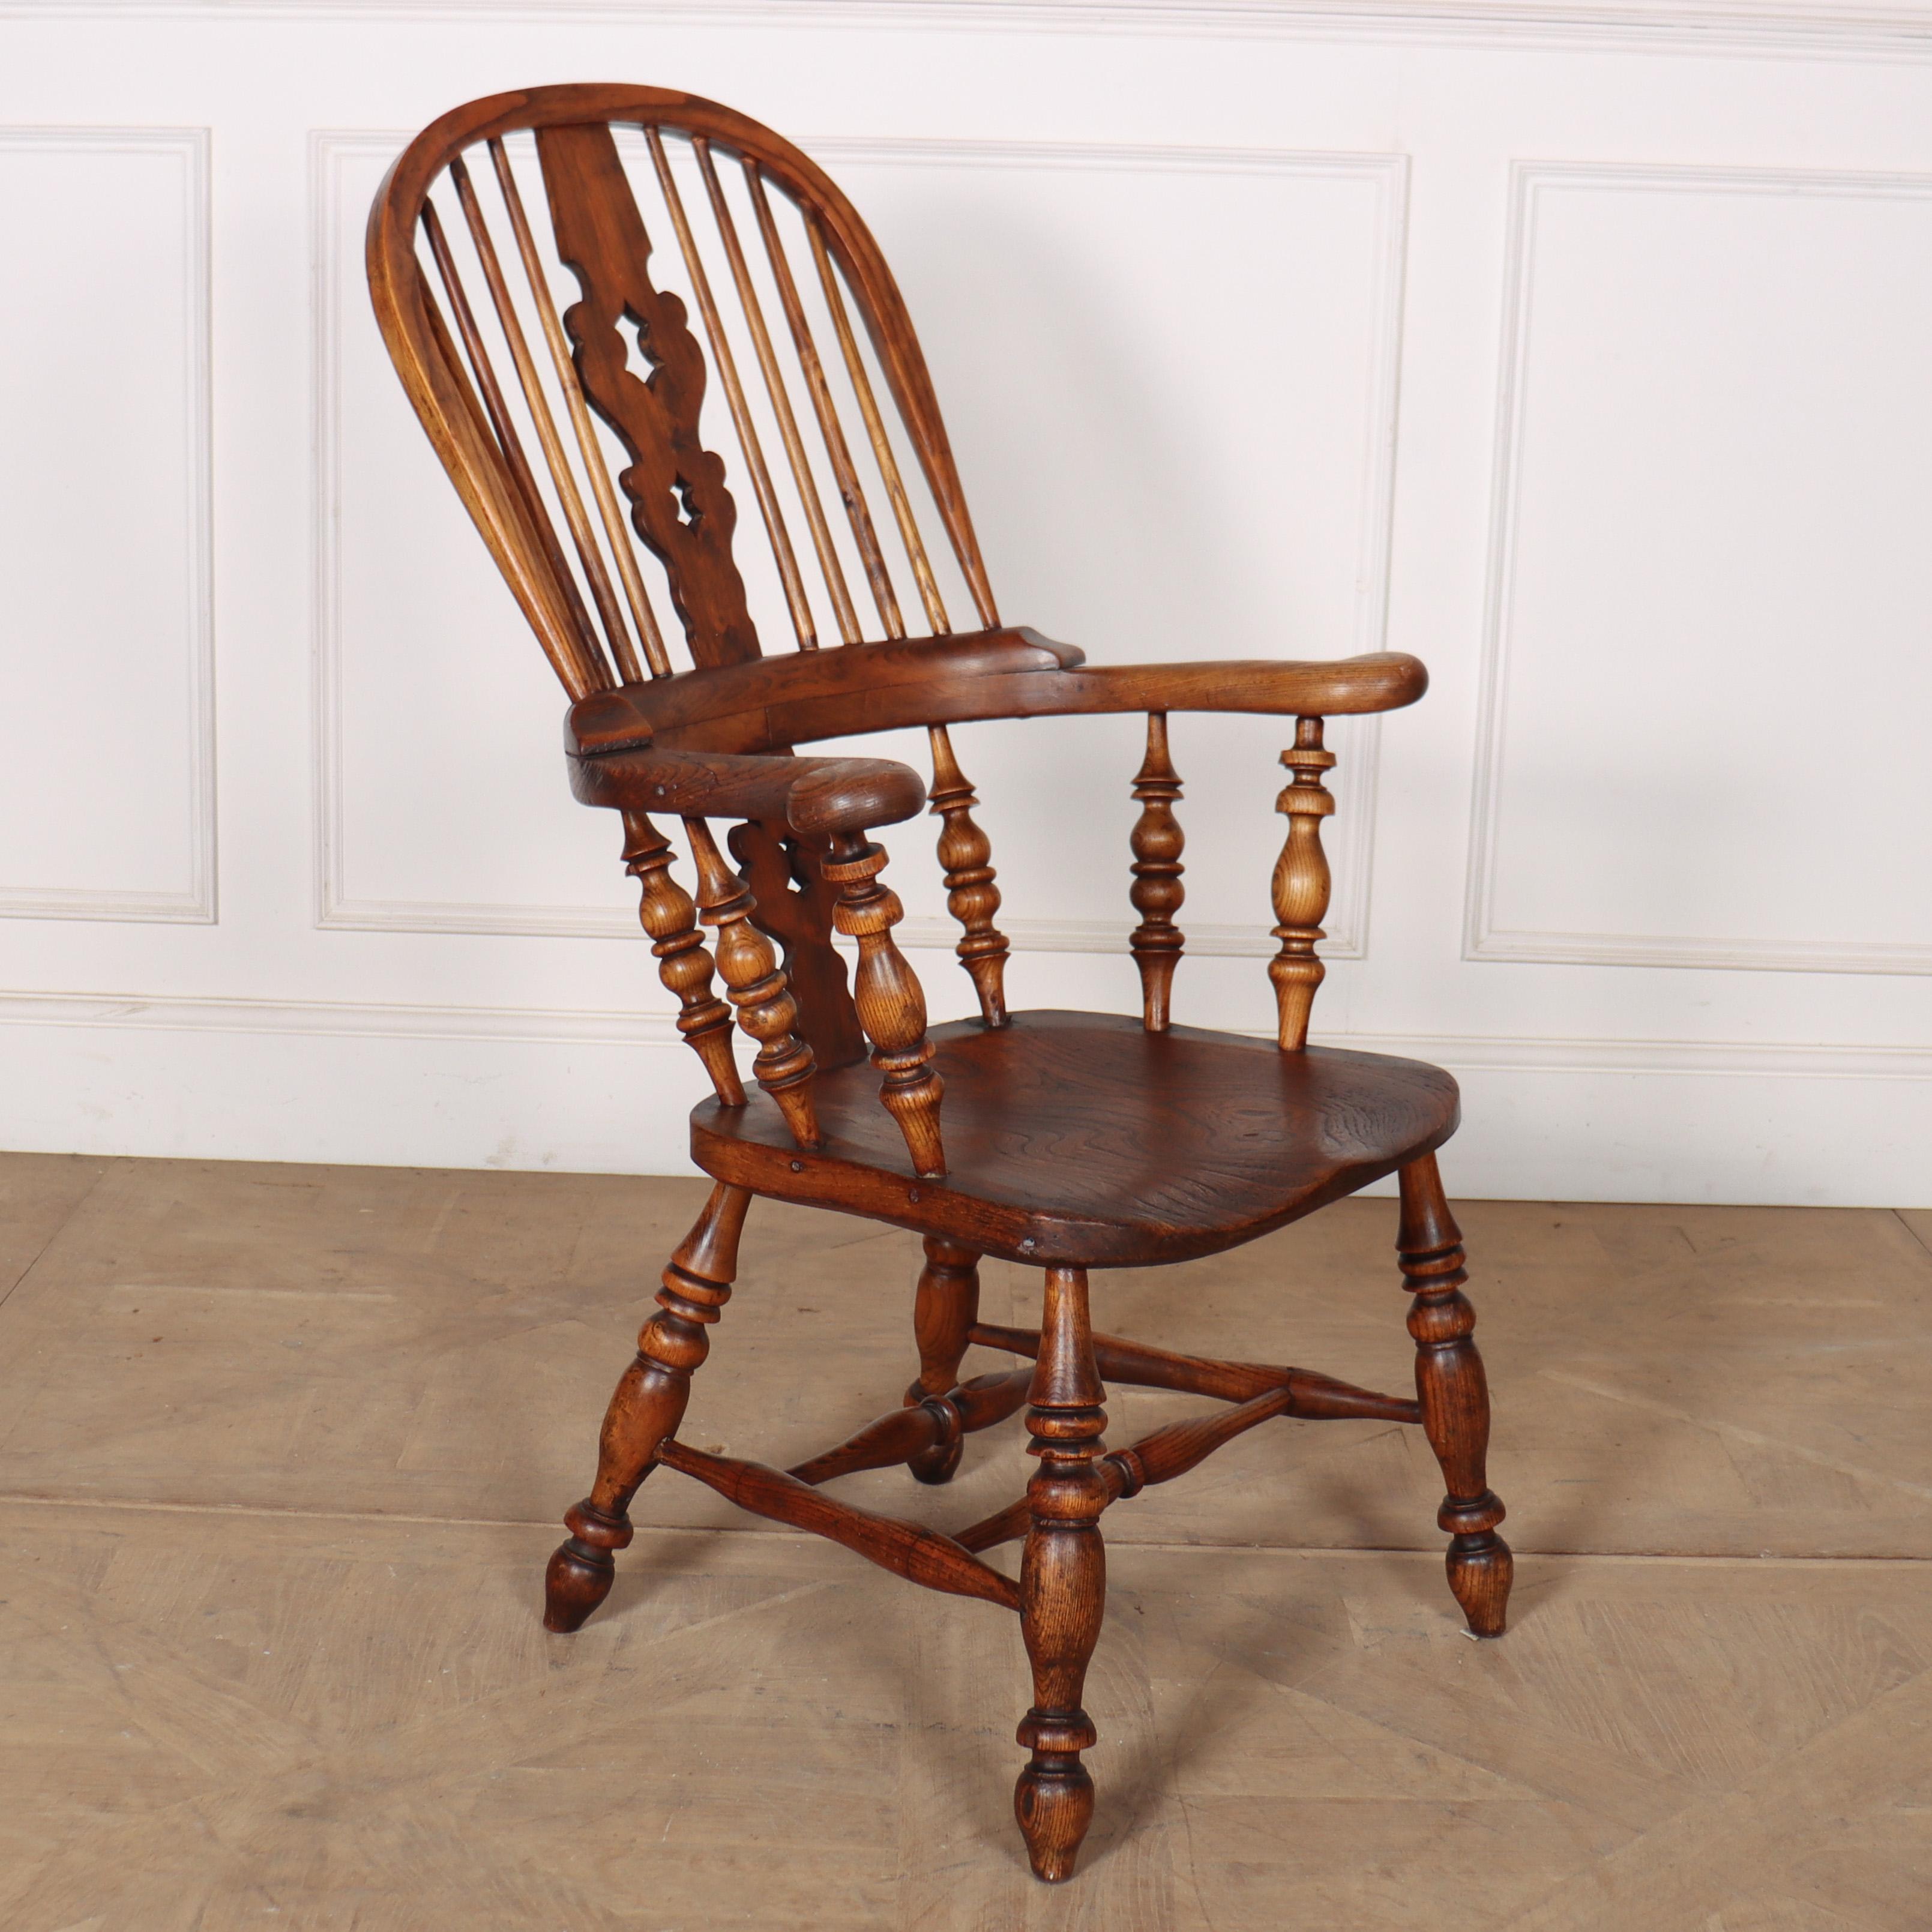 19th C Yorkshire broad arm windsor chair. 1850.

Reference: 8129

Dimensions
26 inches (66 cms) Wide
28.5 inches (72 cms) Deep
42.5 inches (108 cms) High